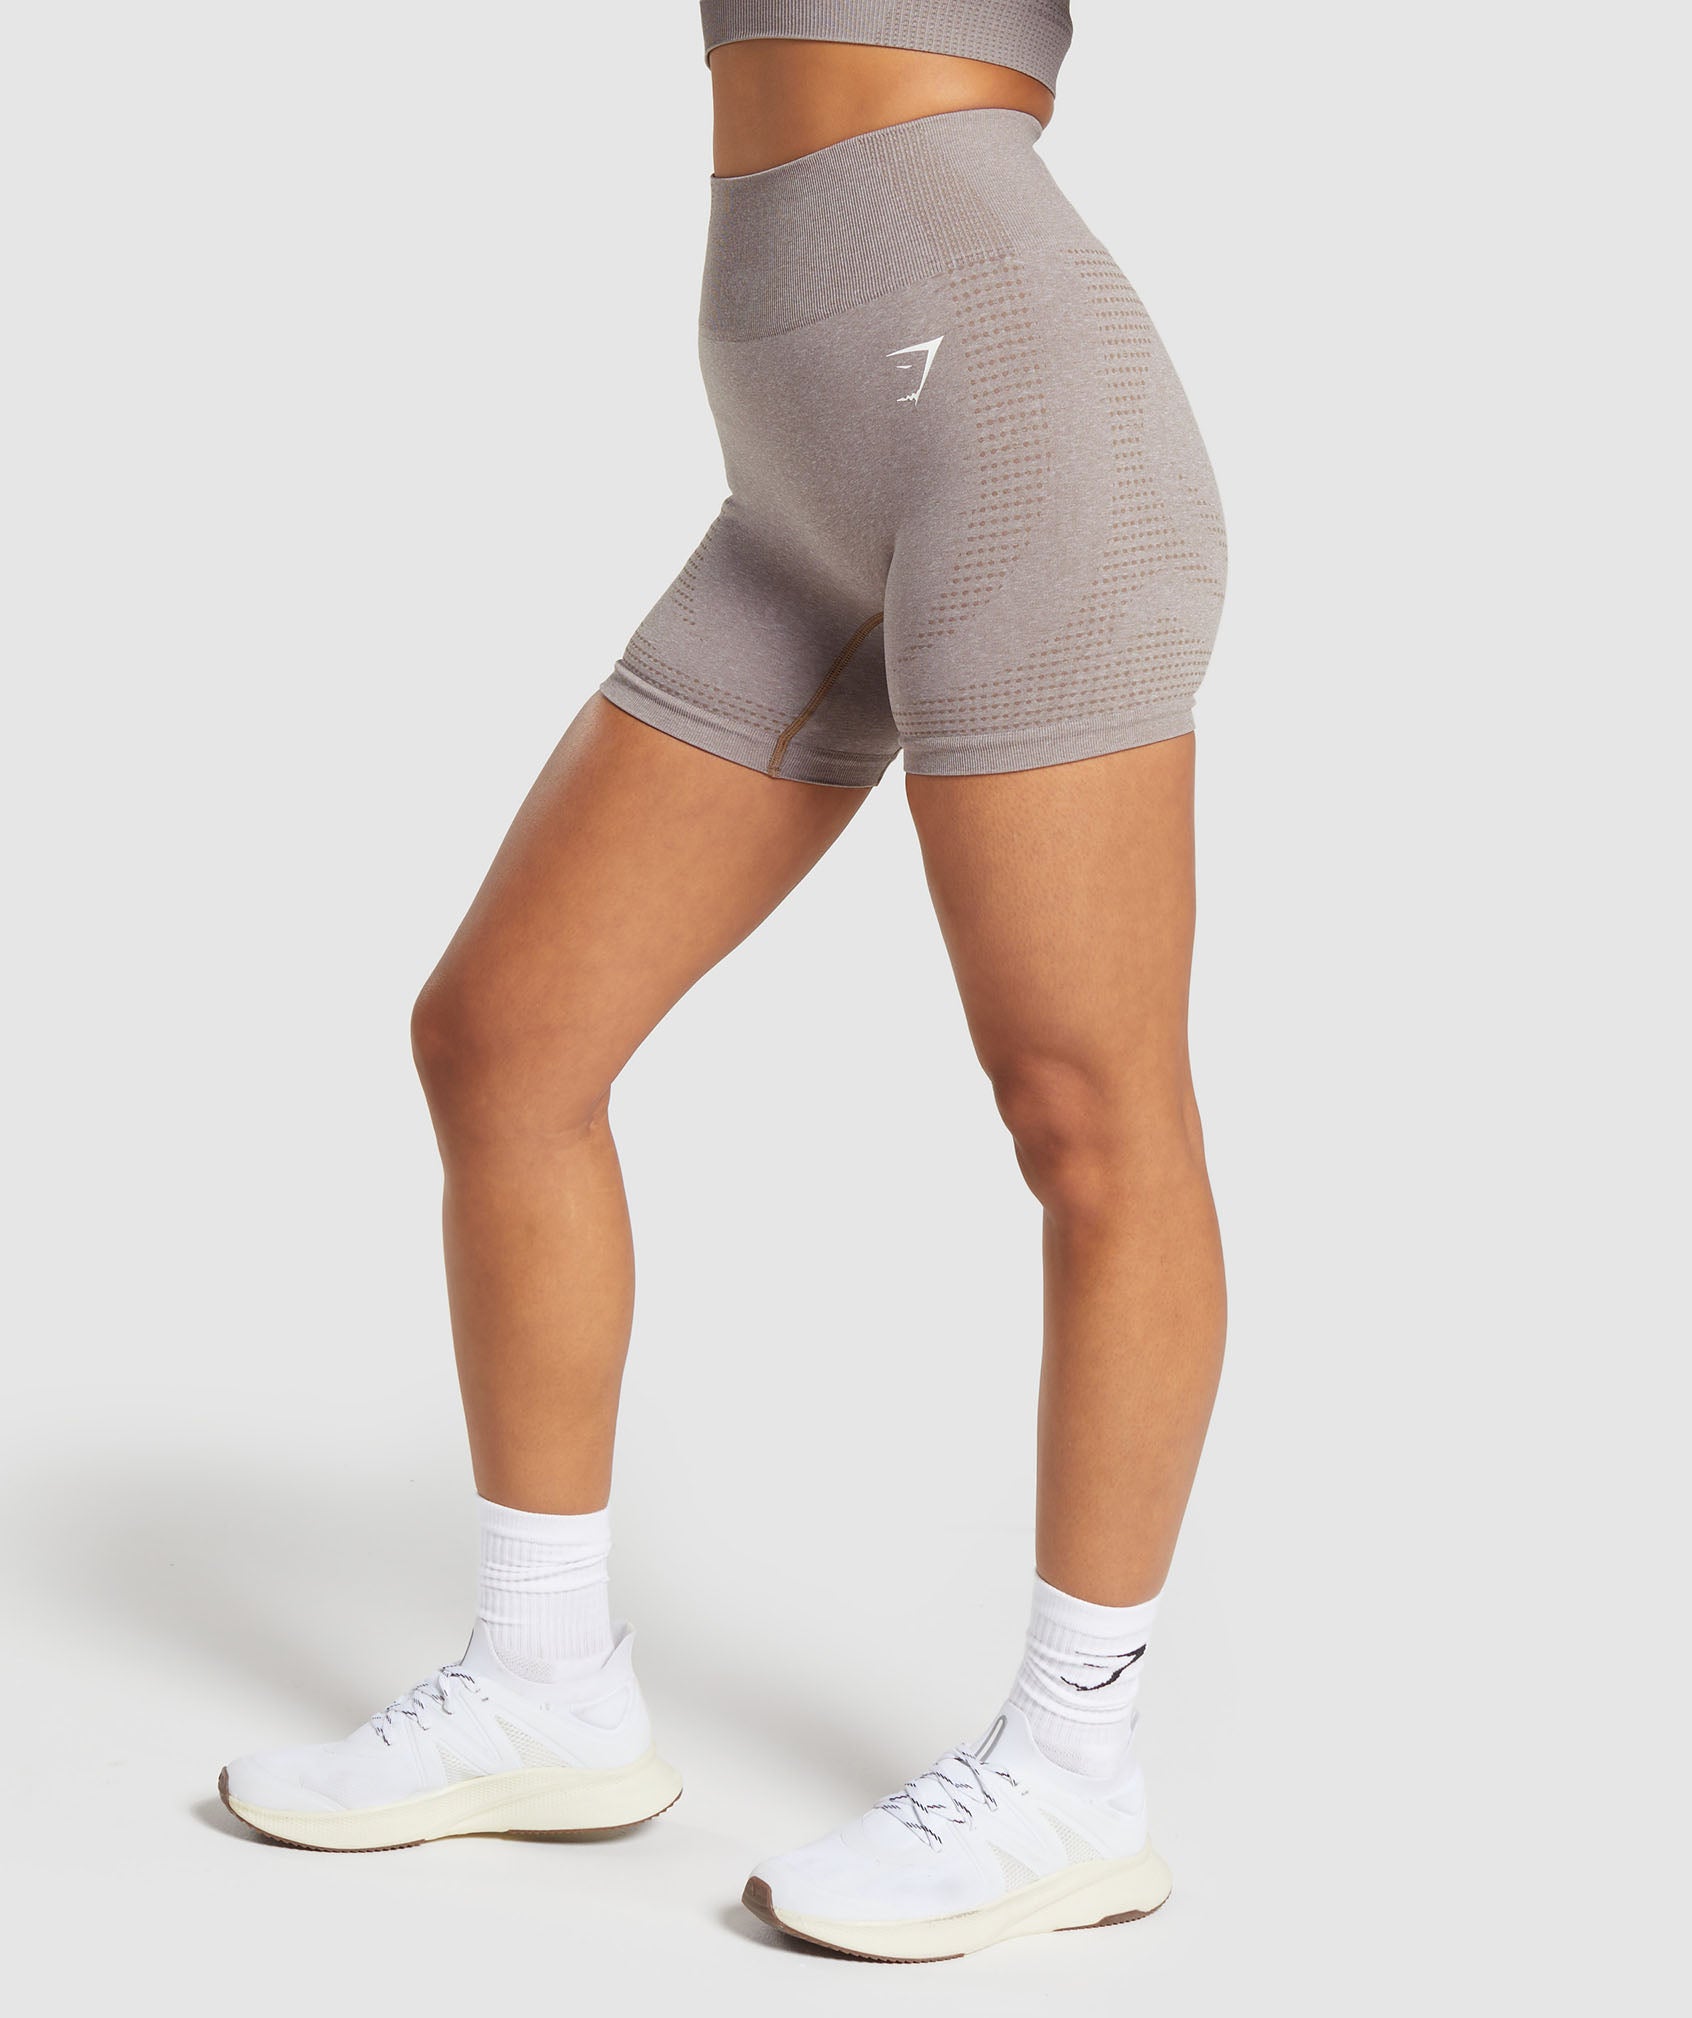 Vital Seamless 2.0 Shorts in Warm Taupe Marl - view 3